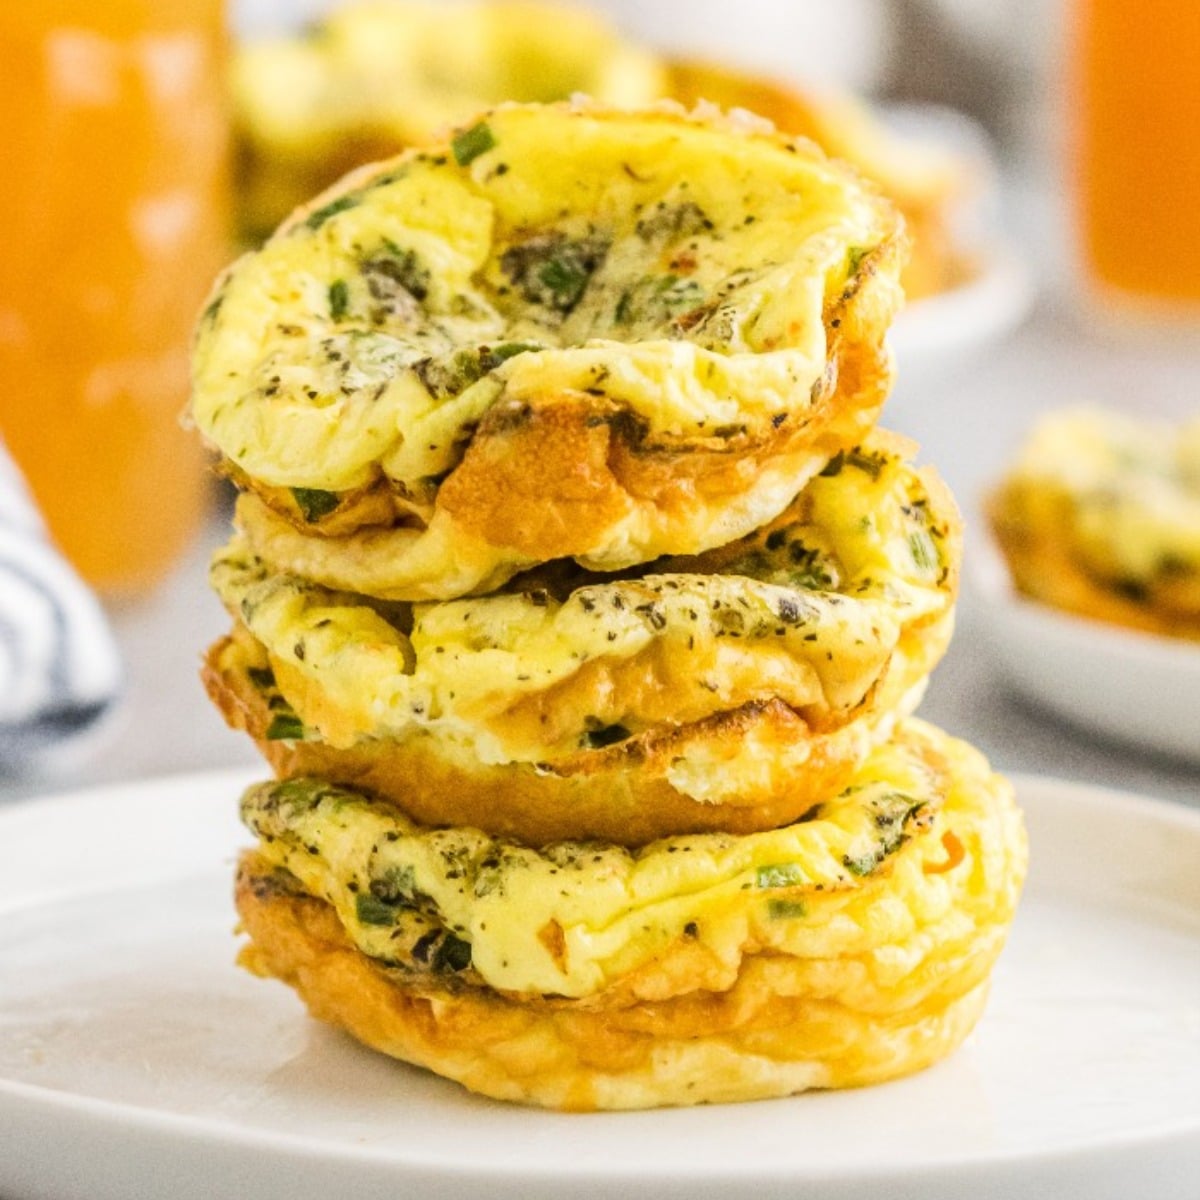 https://www.thefoodieaffair.com/wp-content/uploads/2020/10/Egg-Muffin-Cups-1200.jpg